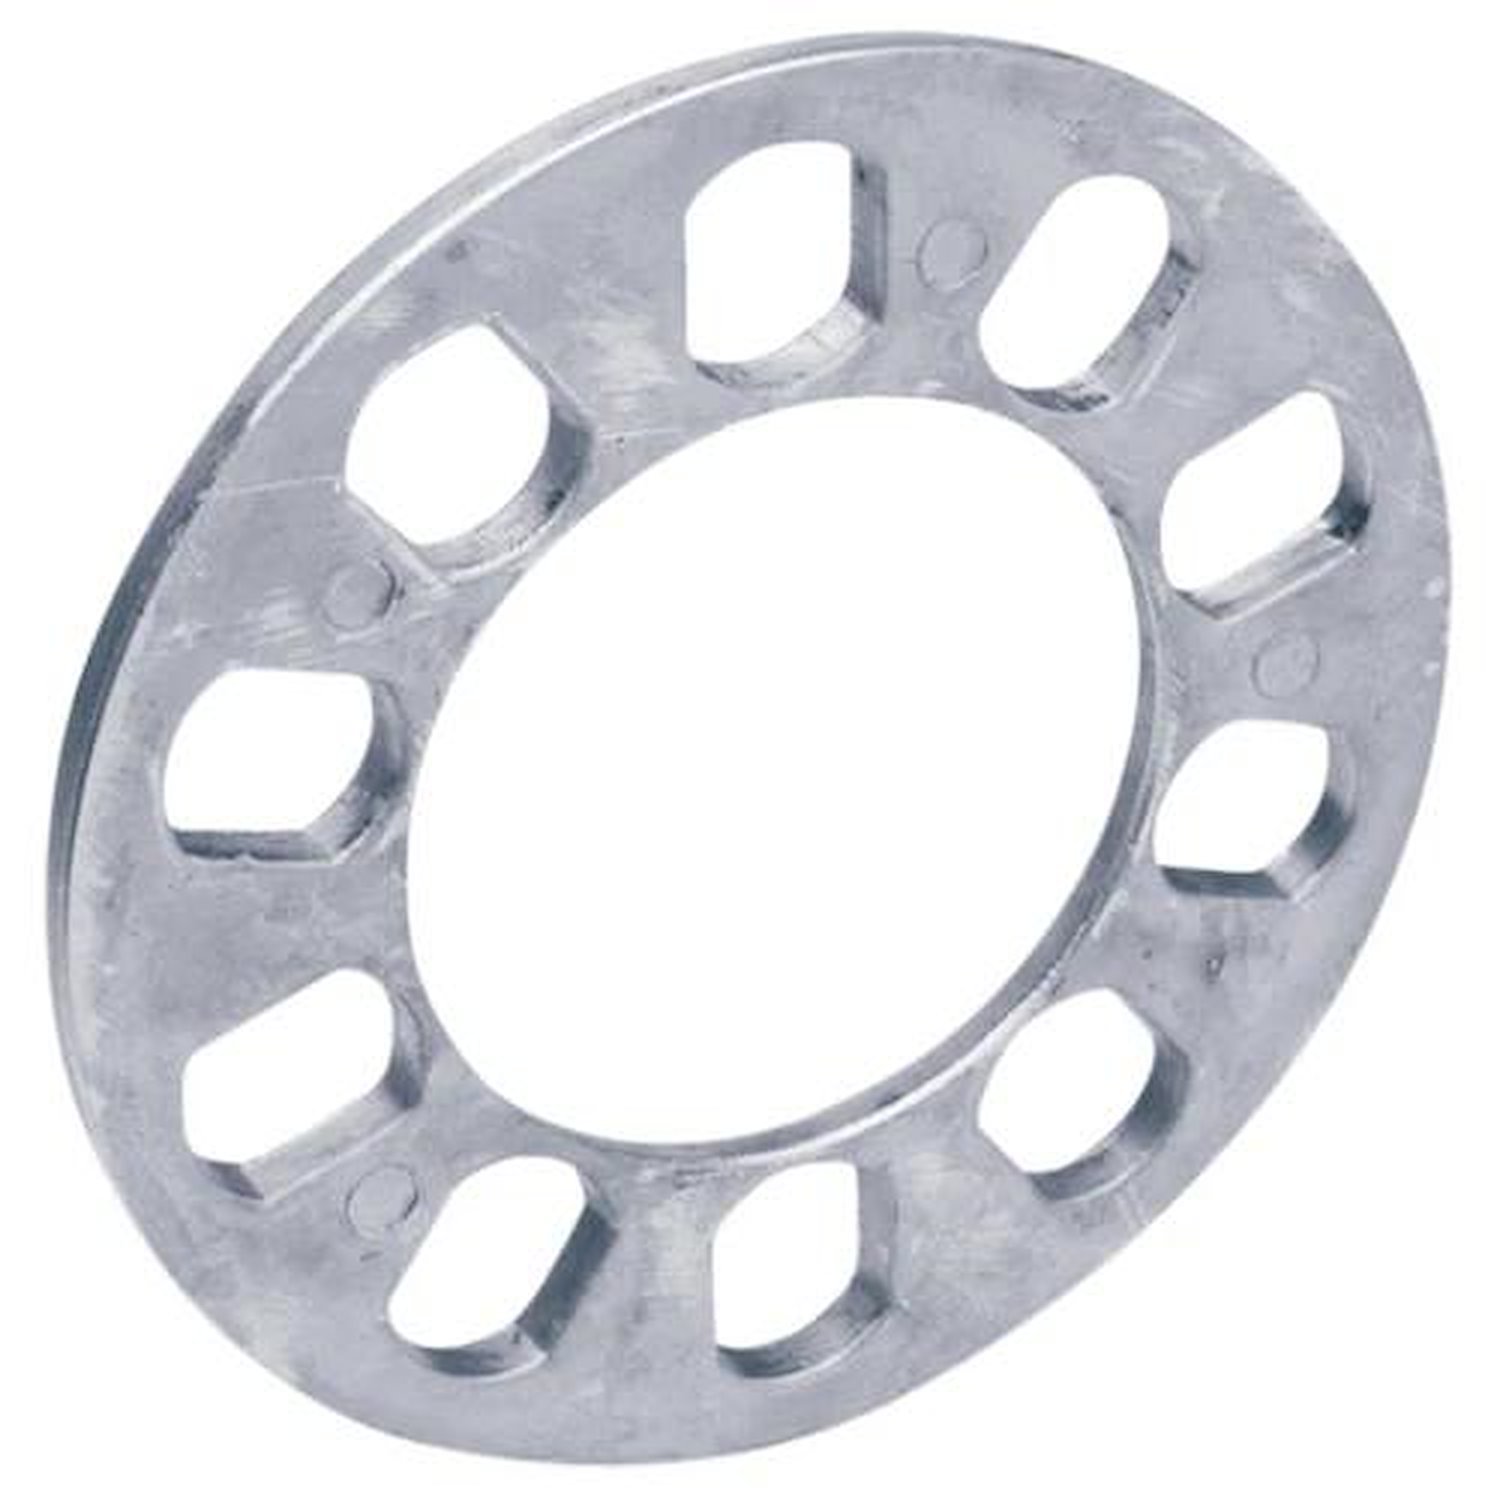 SP603C Wheel Spacer, 5 x 5.5 / 6 x 5.5, 1/4" Thick